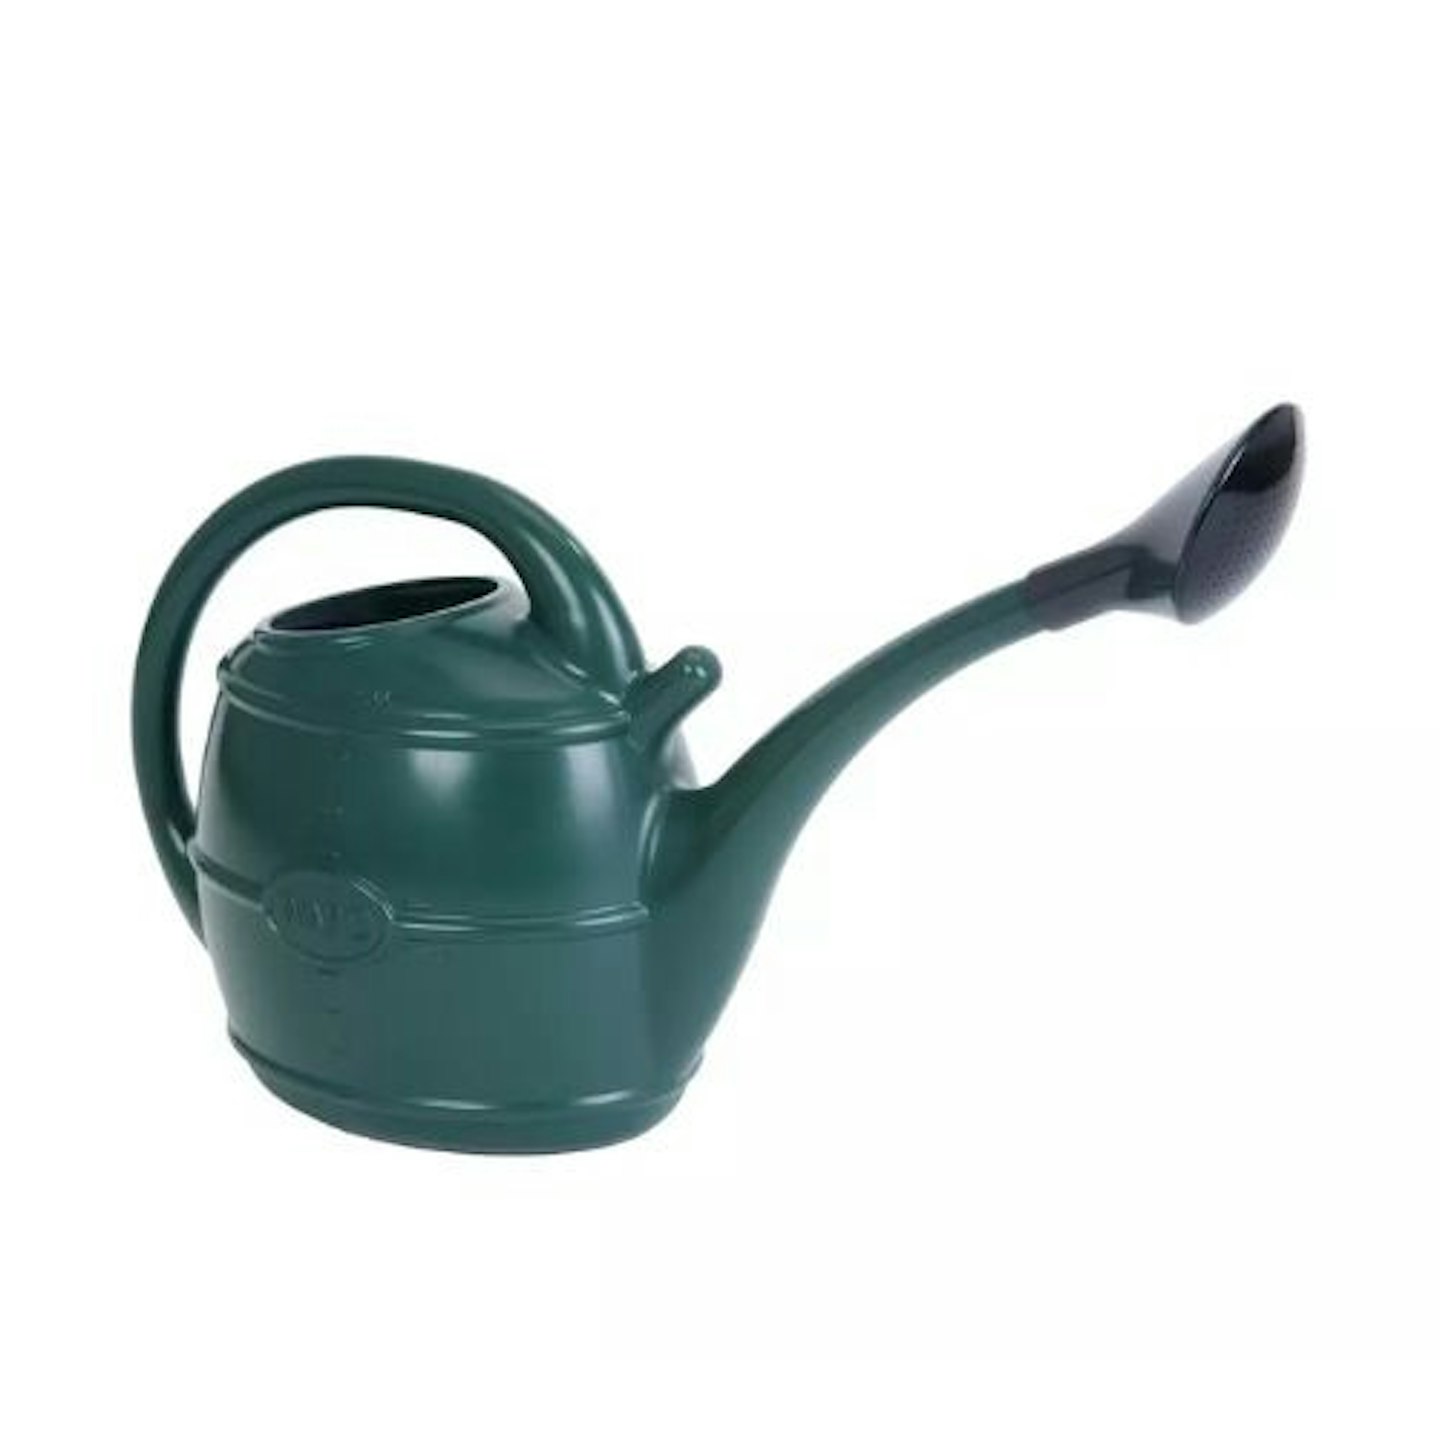 best-watering-cans-uk-ward-watering-can